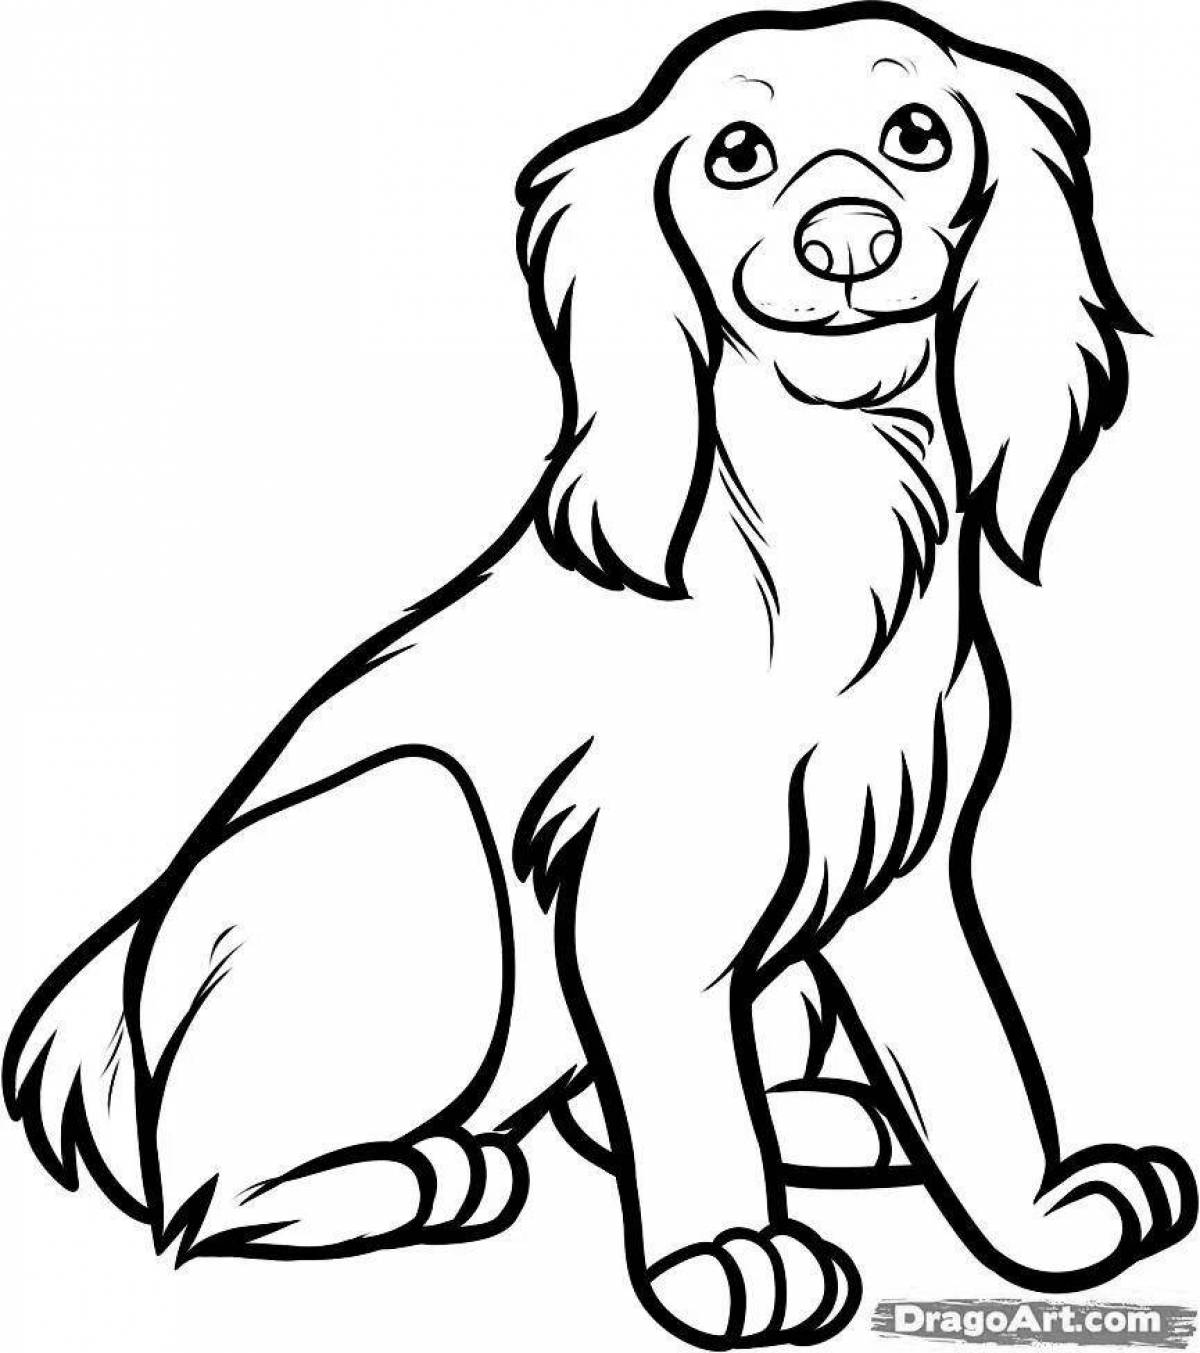 Fancy spaniel coloring page